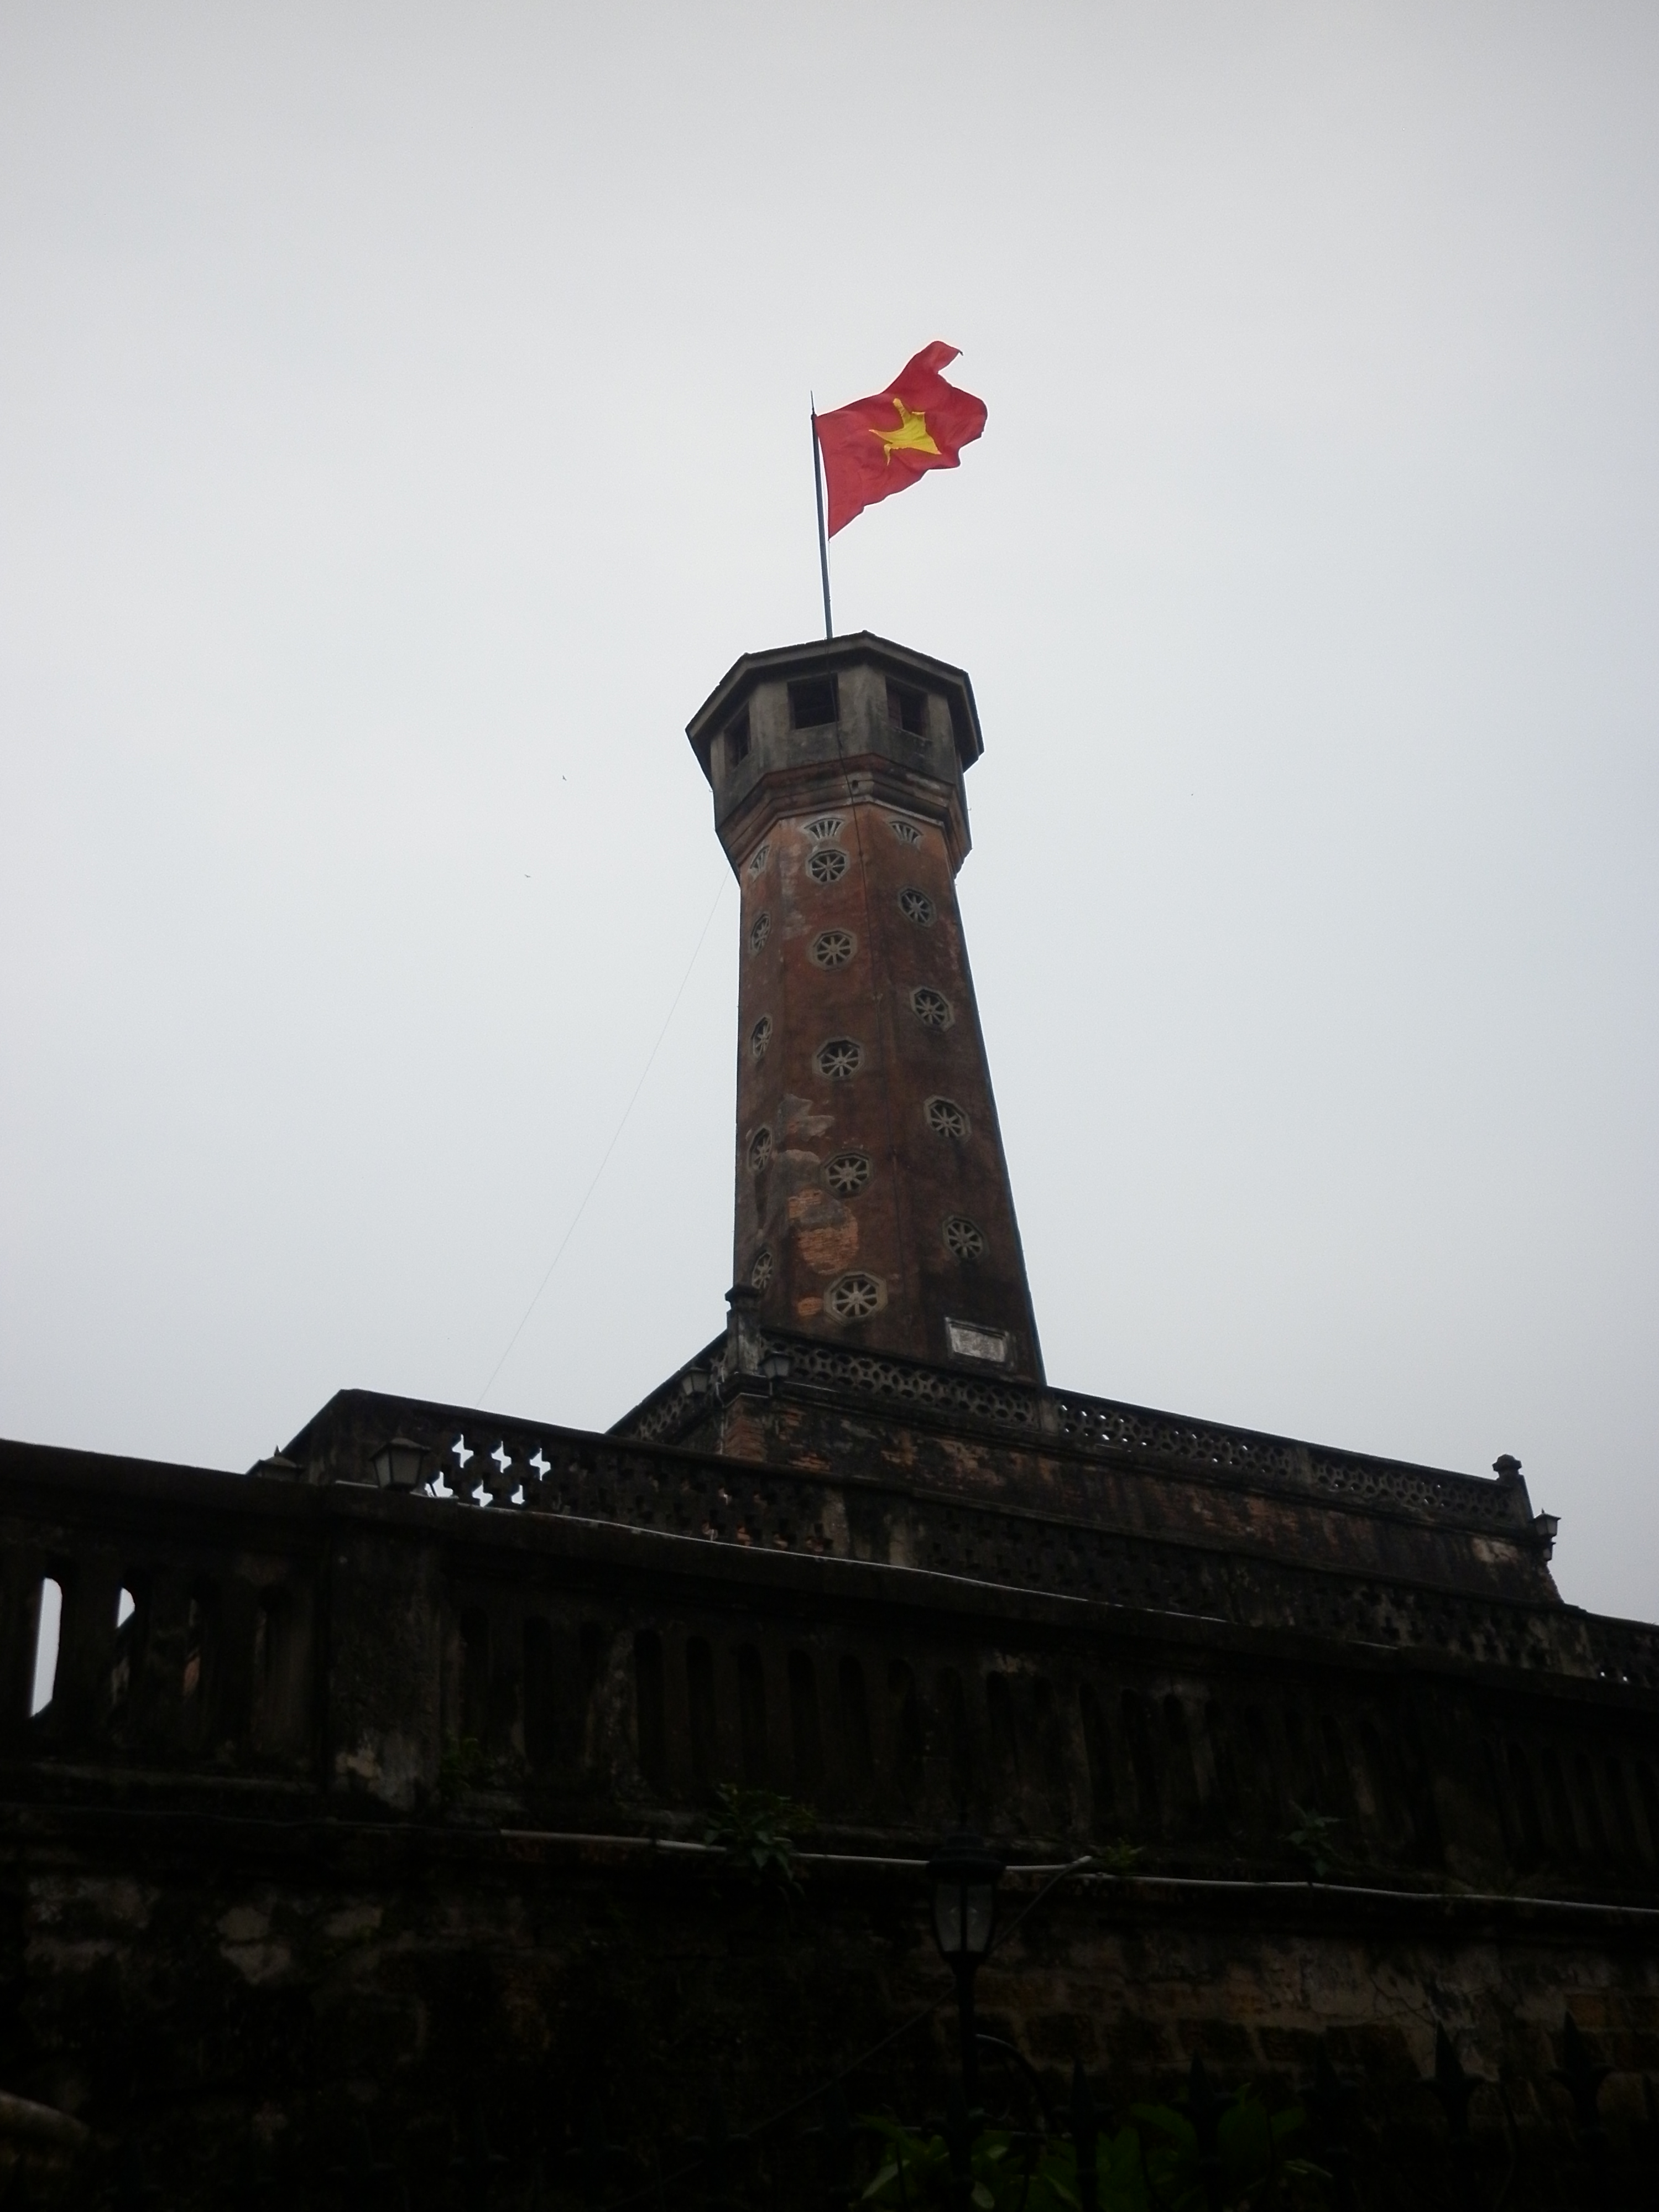 The old flag tower of Hanoi